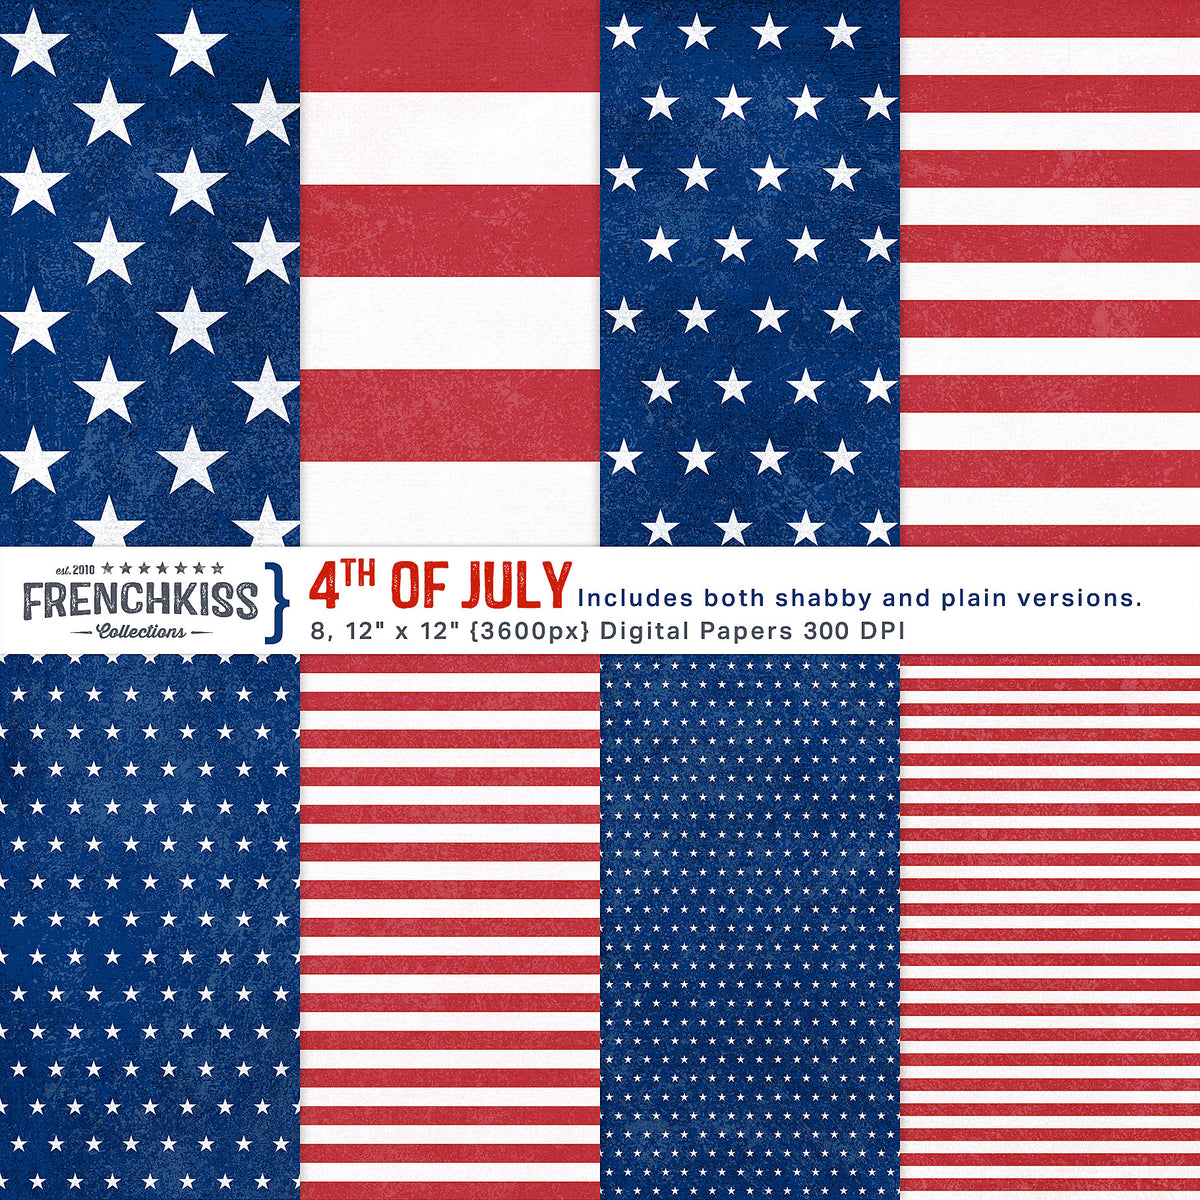 4th of July, red, white and blue stars and stripes digital papers. Personal and Extended licenses.